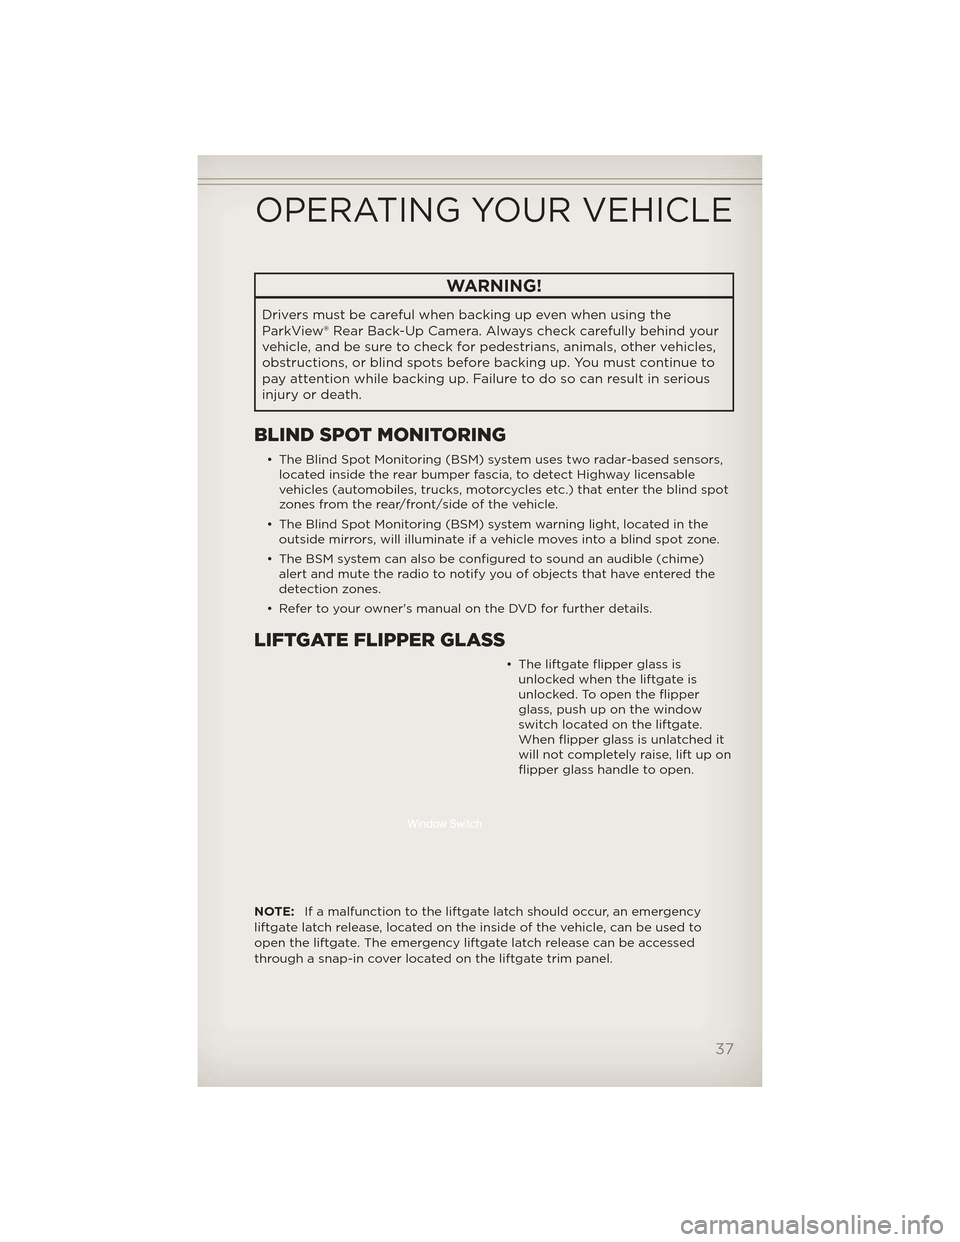 JEEP GRAND CHEROKEE 2012 WK2 / 4.G User Guide WARNING!
Drivers must be careful when backing up even when using the
ParkView® Rear Back-Up Camera. Alwayscheck carefully behind your
vehicle, and be sure to check for pedestrians, animals, other veh